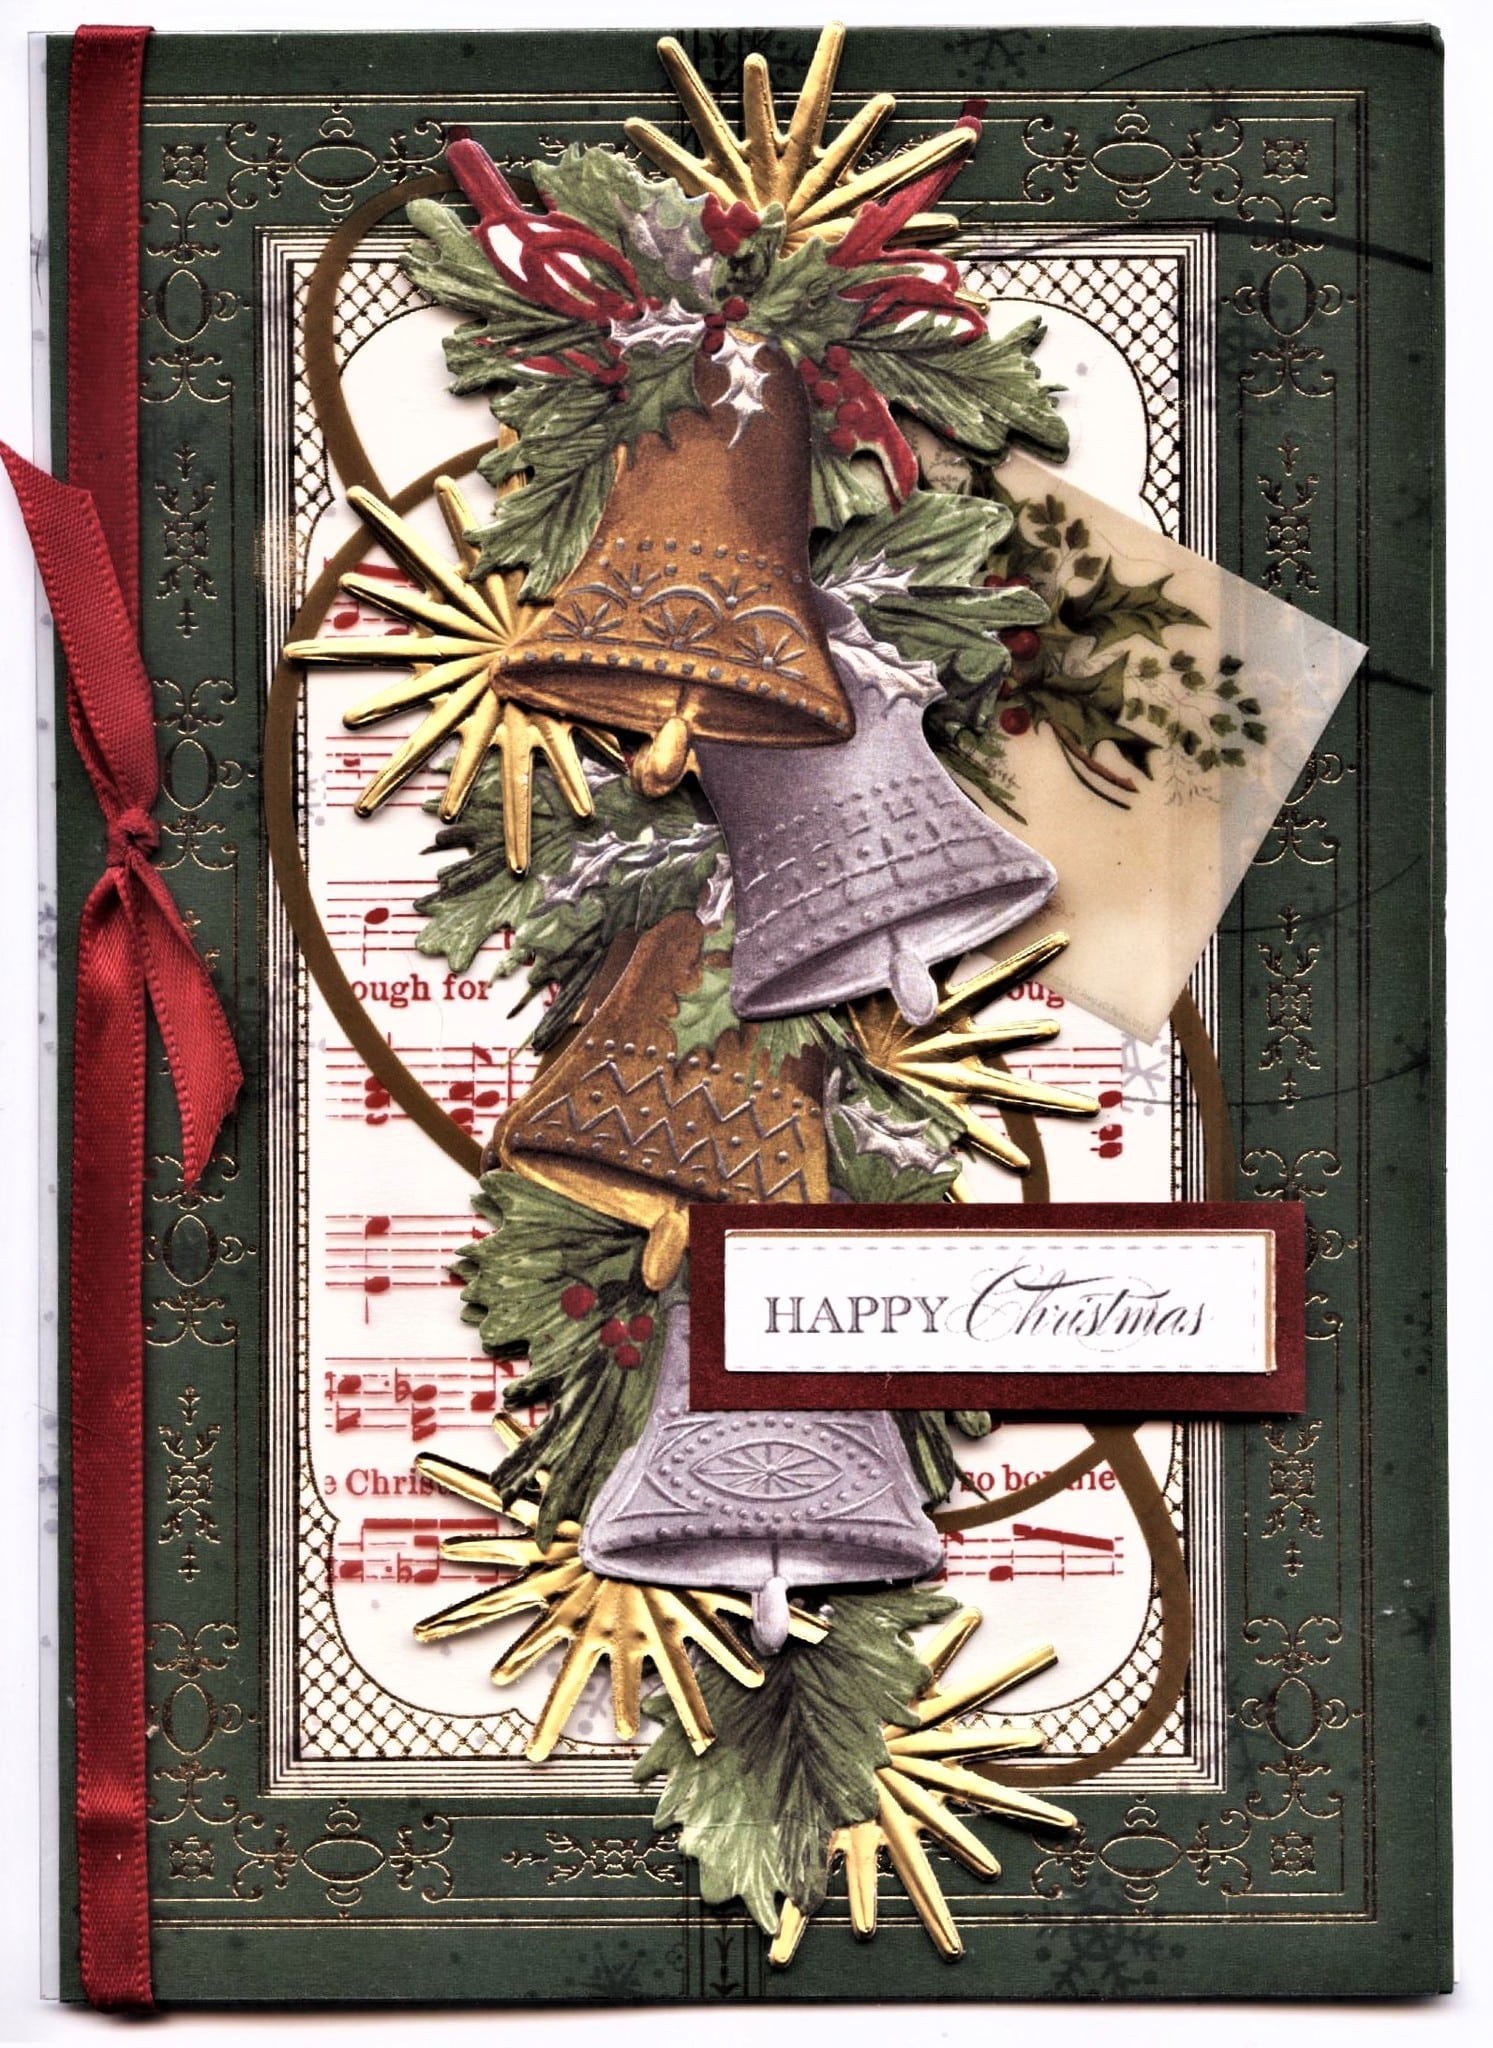 A christmas card with bells and ribbons.